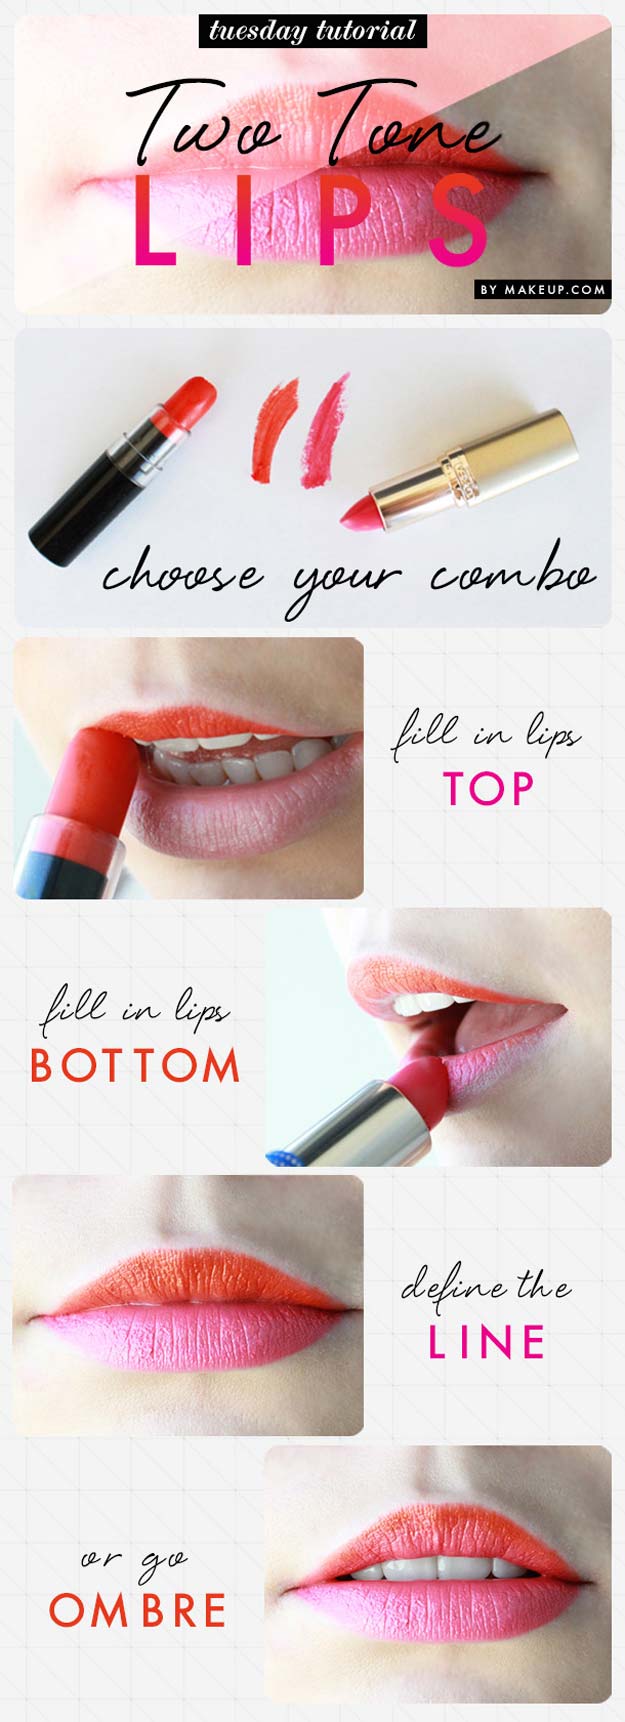 Best Makeup Tutorials for Teens -Two-Tone Lips - Easy Makeup Ideas for Beginners - Step by Step Tutorials for Foundation, Eye Shadow, Lipstick, Cheeks, Contour, Eyebrows and Eyes - Awesome Makeup Hacks and Tips for Simple DIY Beauty - Day and Evening Looks http://diyprojectsforteens.com/makeup-tutorials-teens 